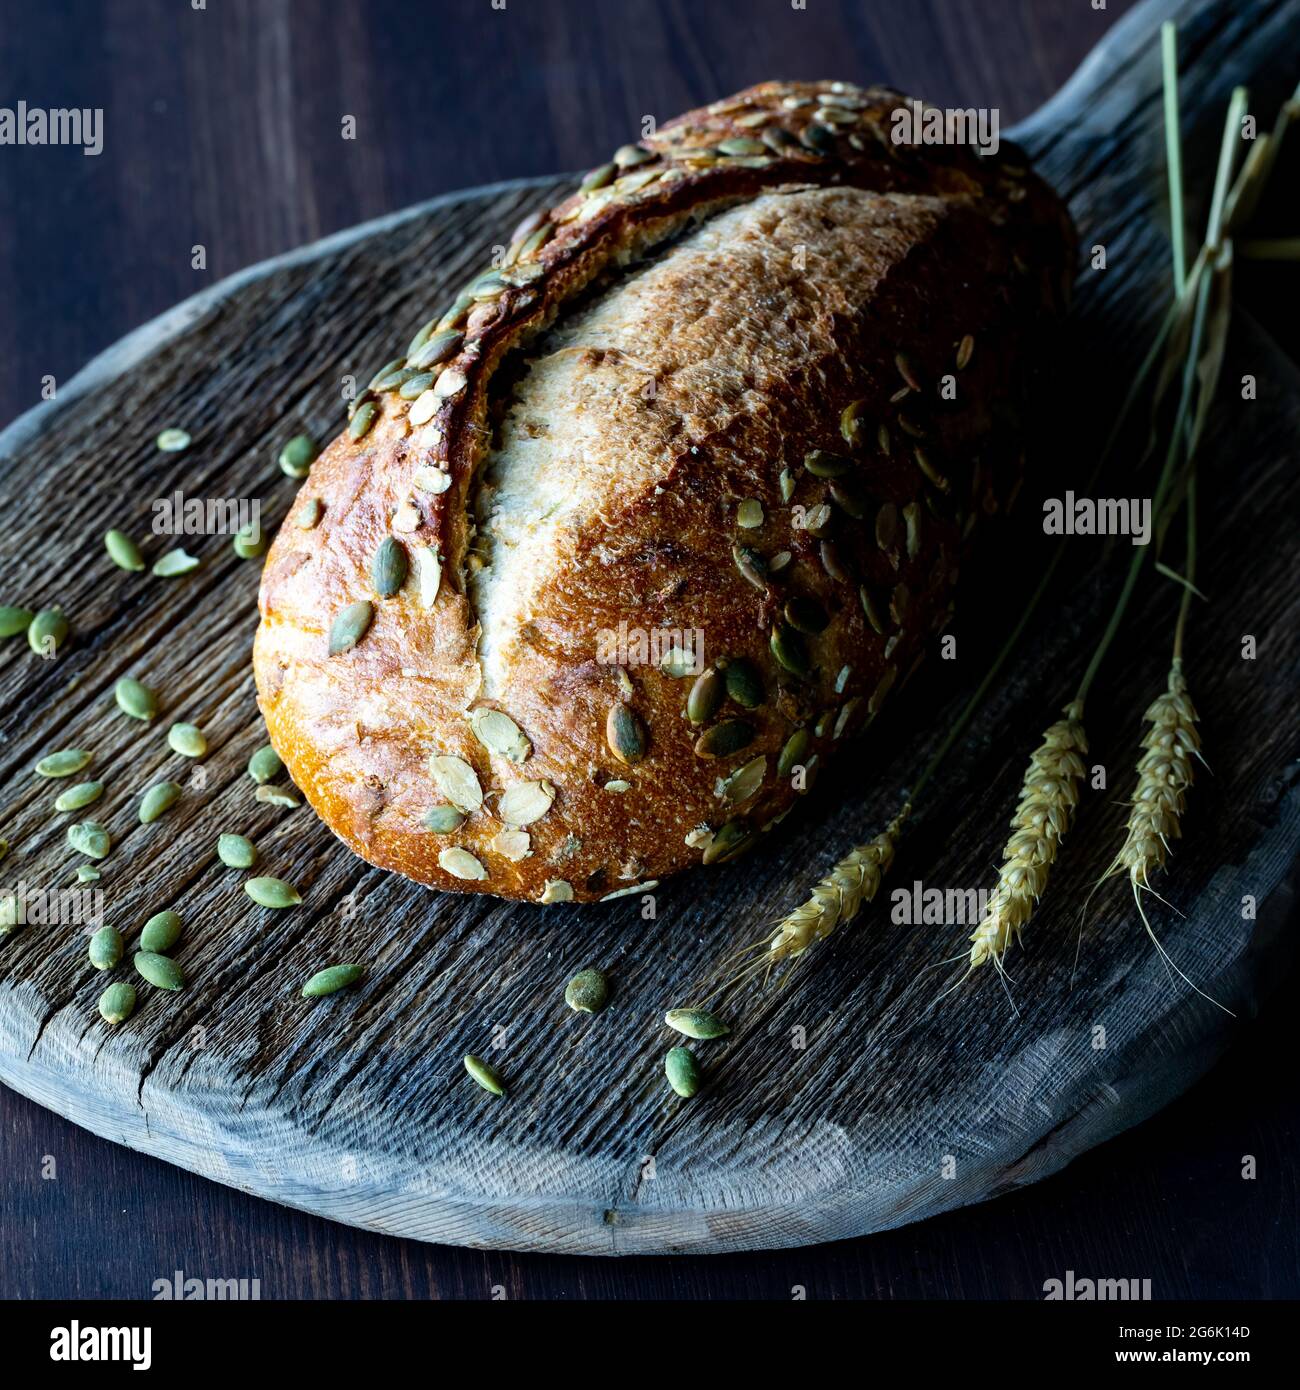 Close up view of a loaf of pumpkin seed bread on a rustic wooden board against a dark background. Stock Photo